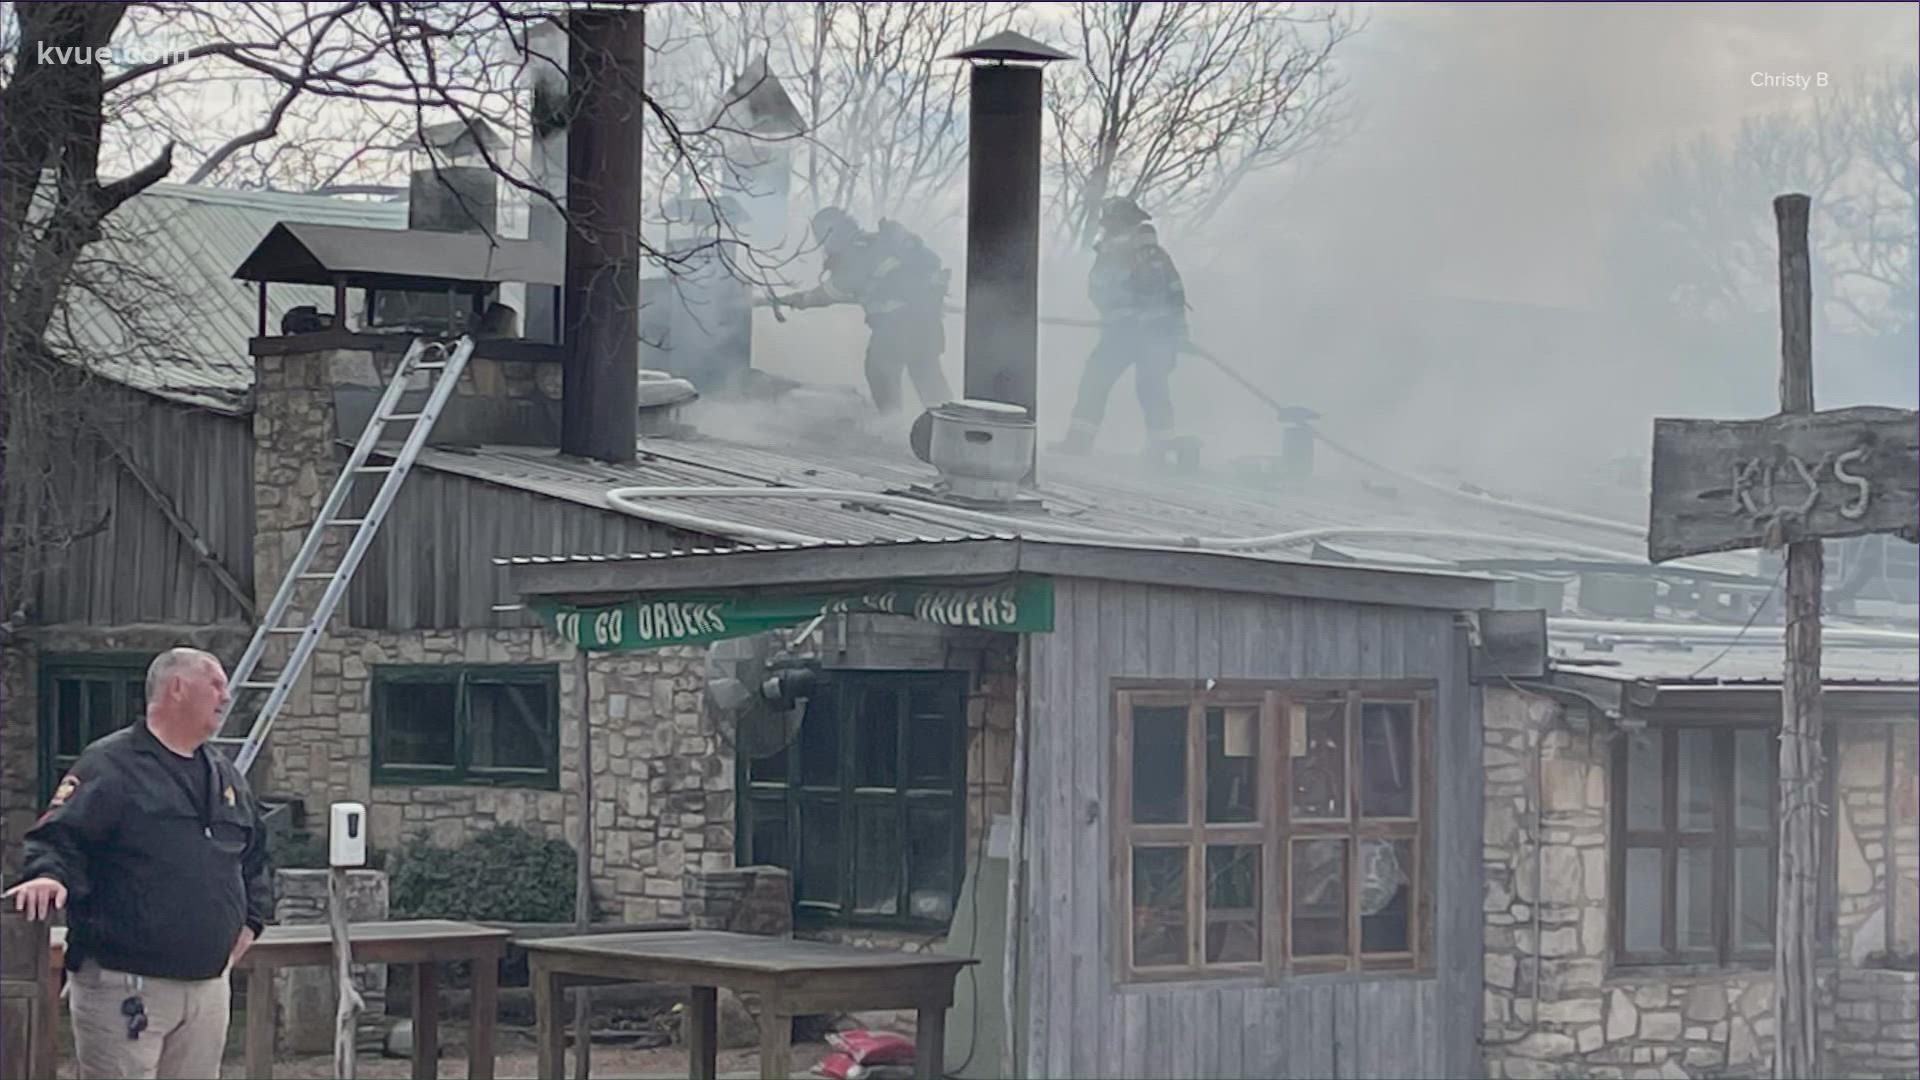 The barbecue restaurant said the fire is under control and no one was hurt.